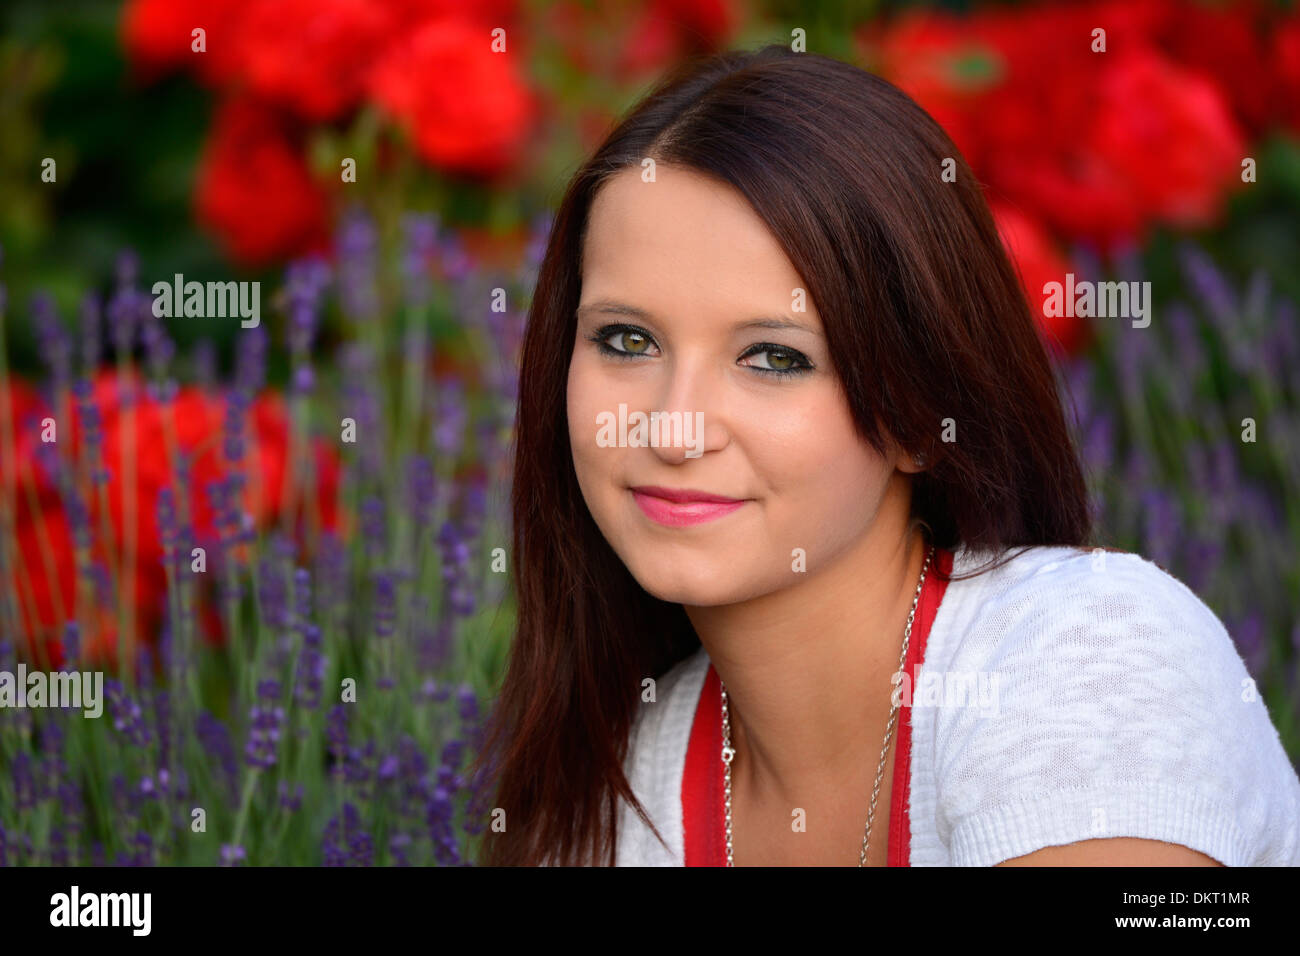 Europe Switzerland Woman Young Girl High Resolution Stock Photography and  Images - Alamy